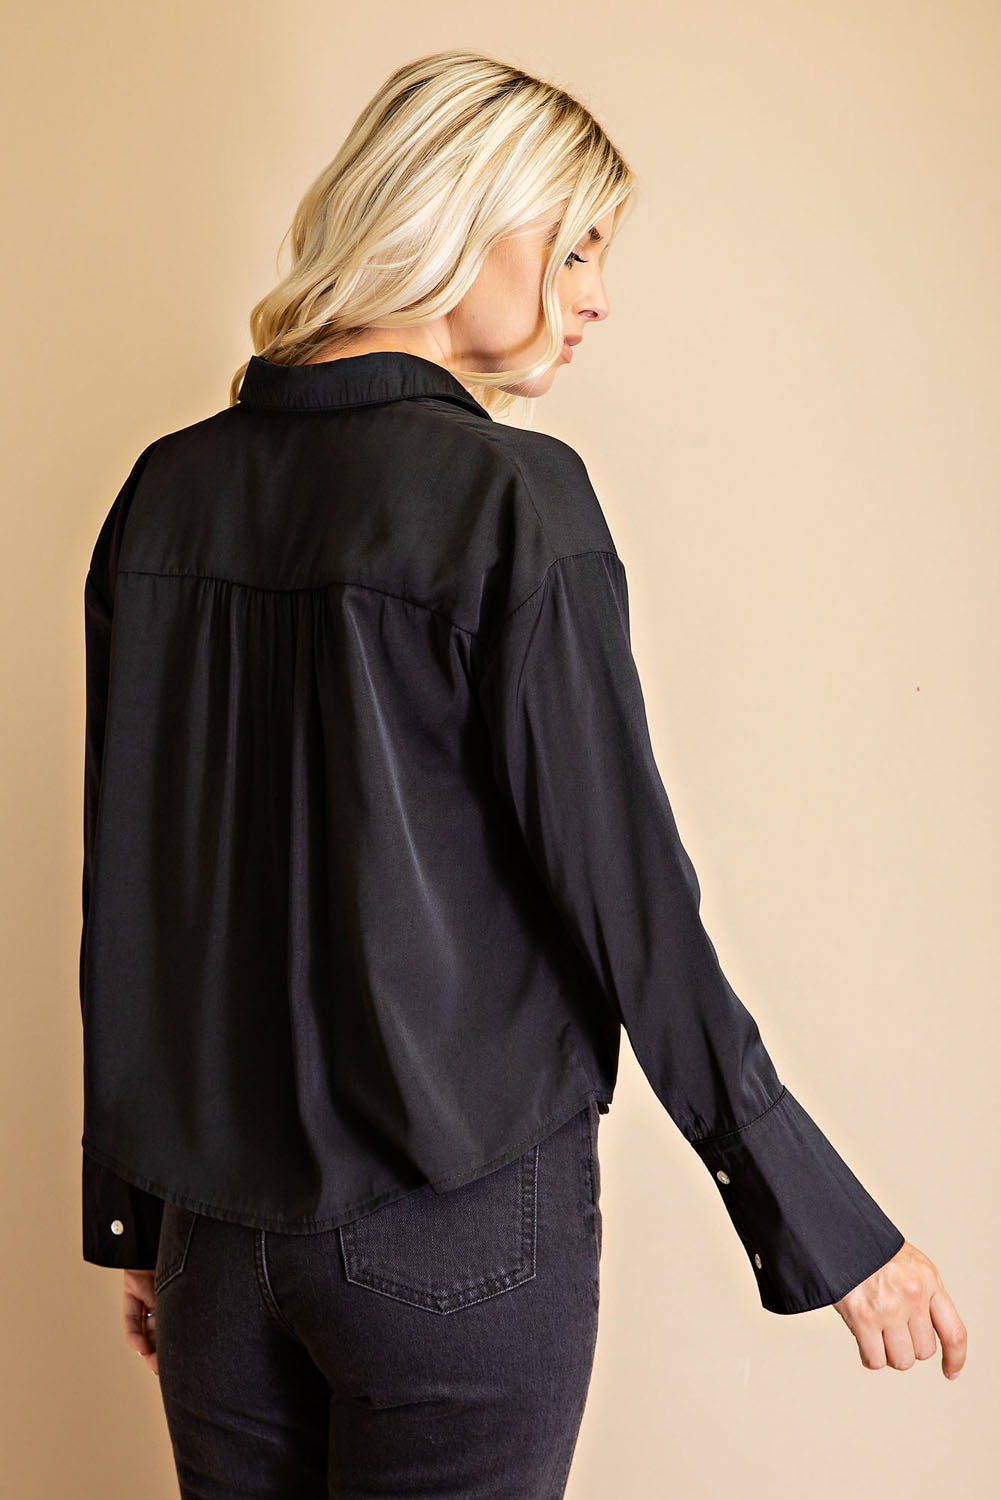 Glam Black Button Front Shirt with Cuffed Bell Sleeves